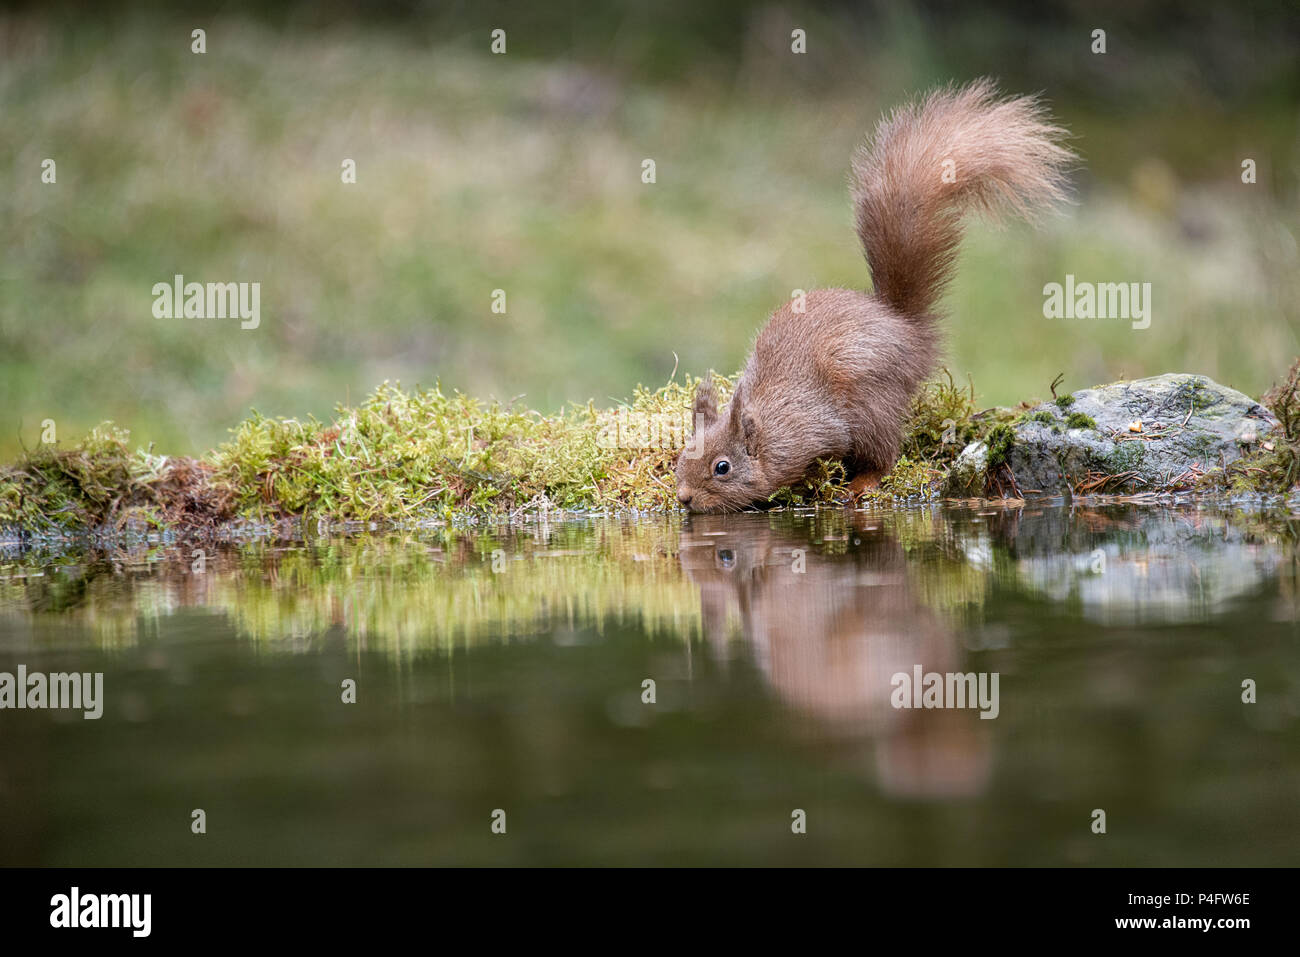 A close photograph of a red squirrel with a bushy tail at a pond drinking and with its reflection in the water Stock Photo